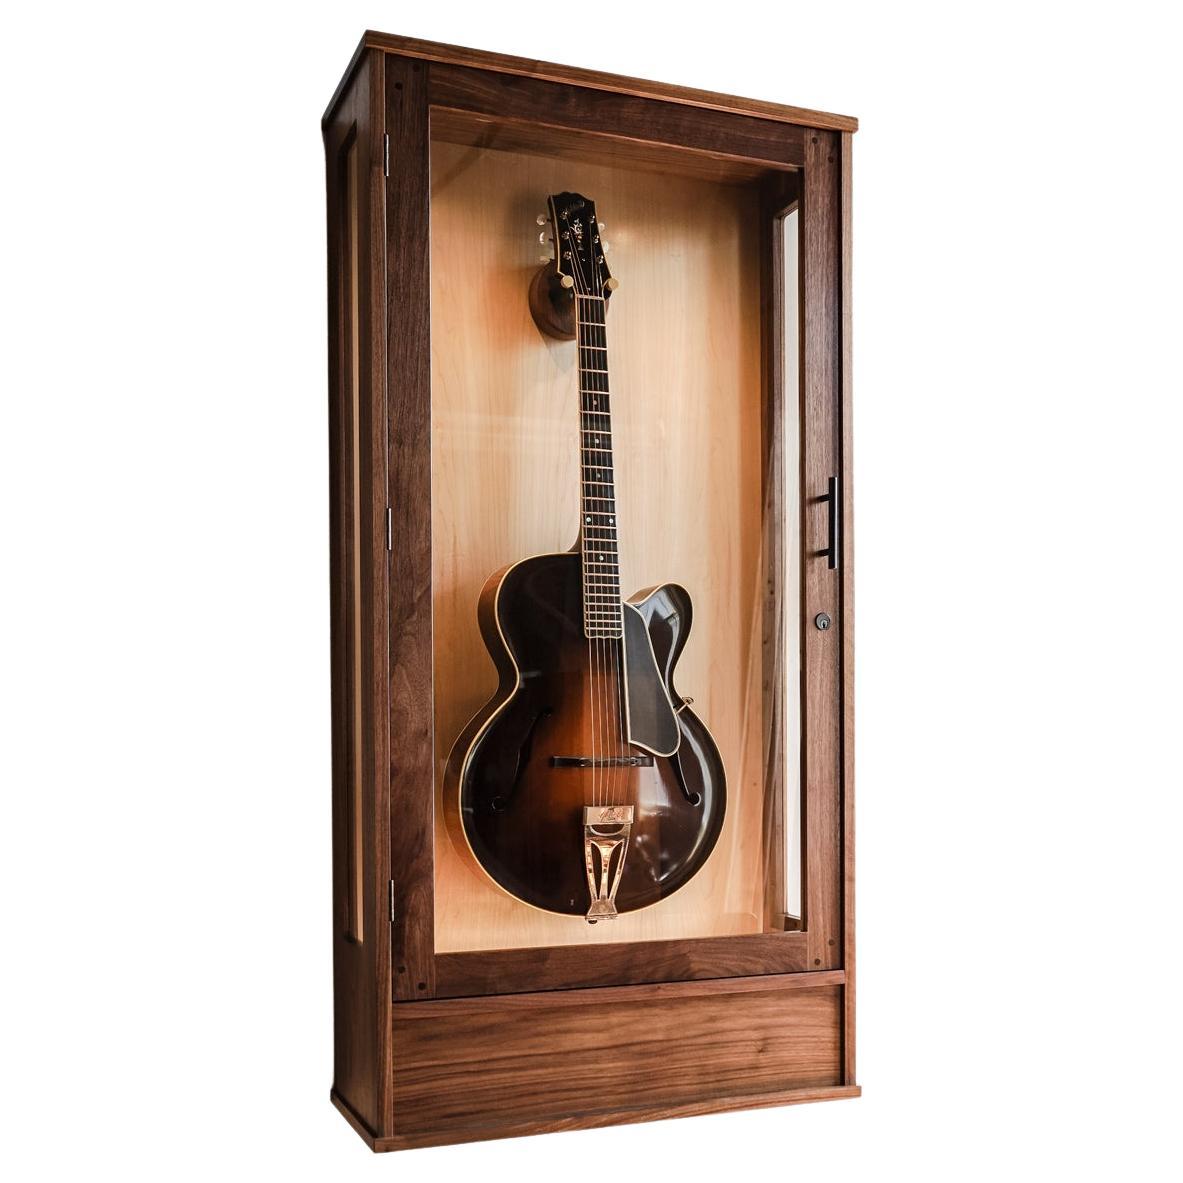 Guitar Humidor, Wall-Mount Display Case, Handcrafted in America - The Nashville